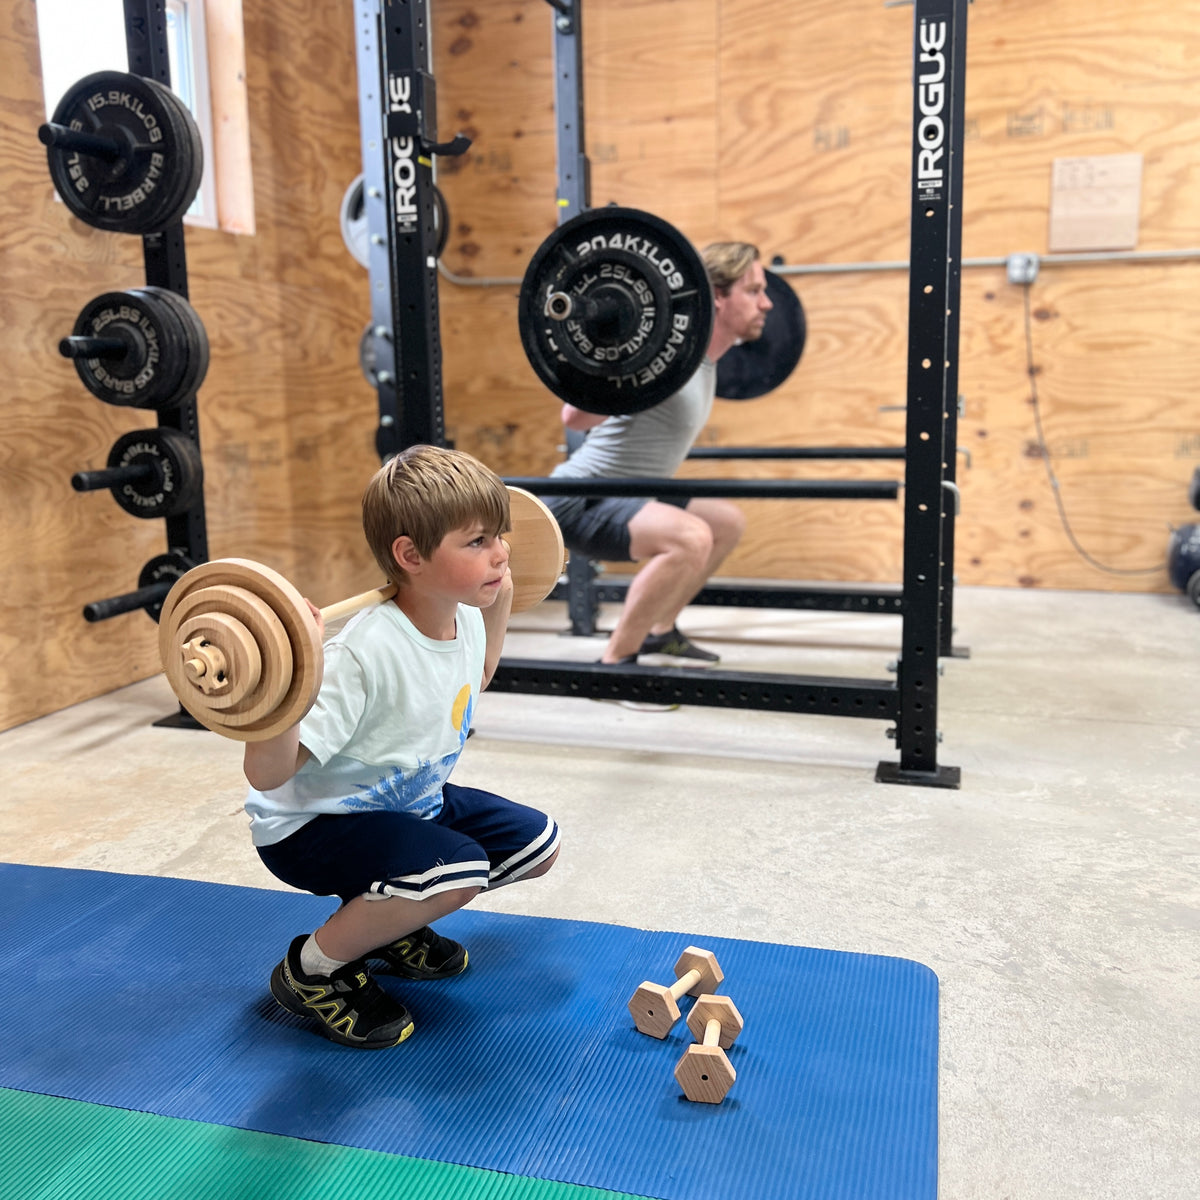 TO BE DISCONTINUED: Weight Lifting Toy - Barbell